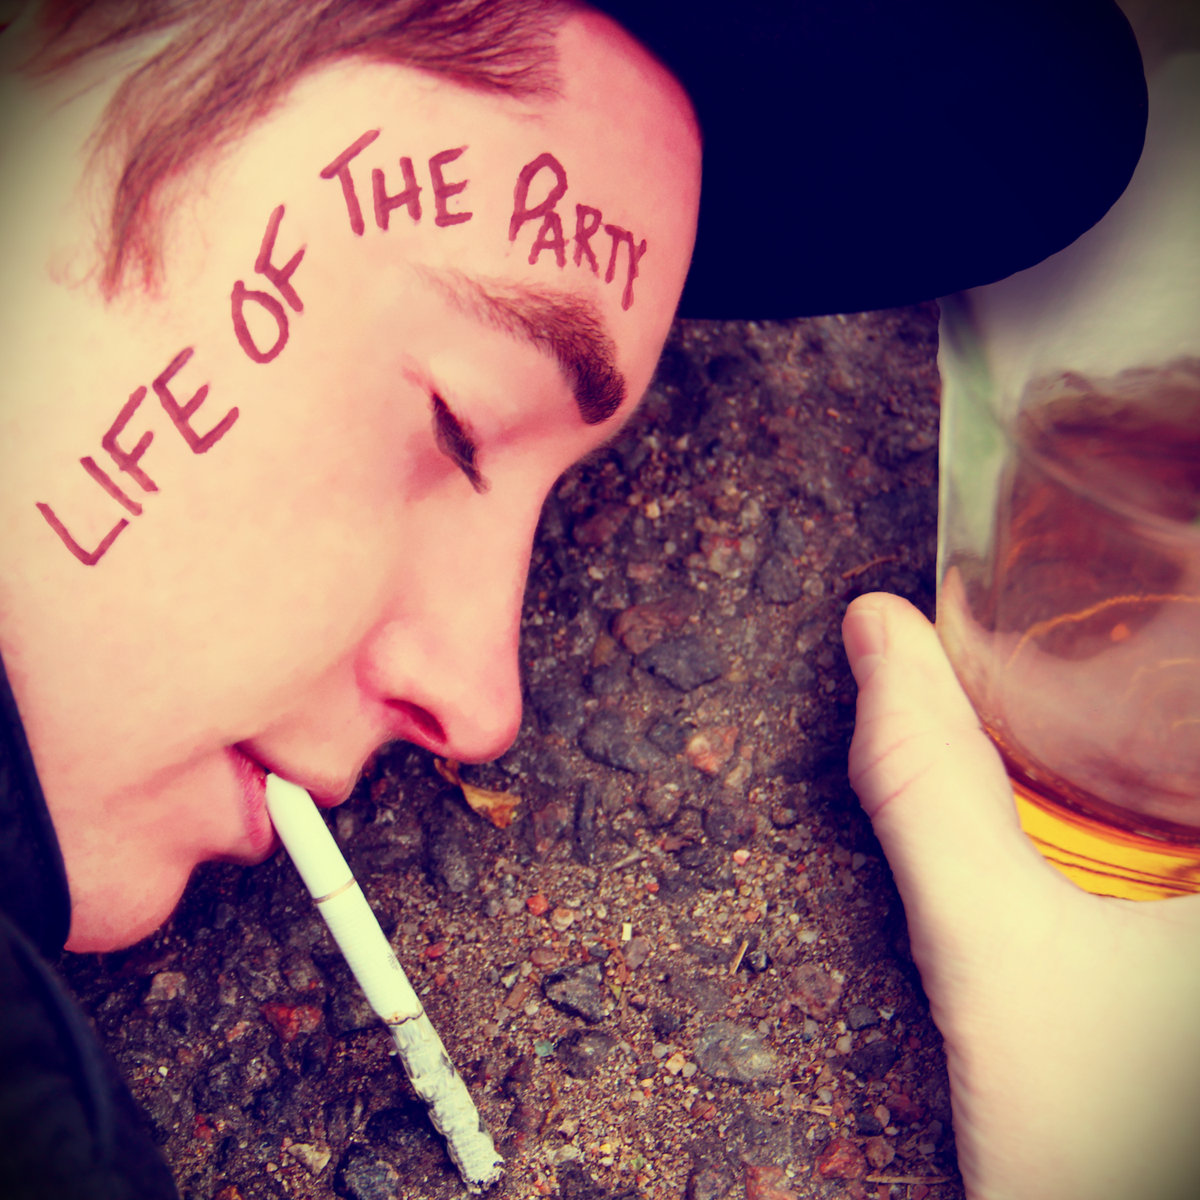 Samples - Bred2Party @ 'Life of the Party' album (electronic, dubstep)